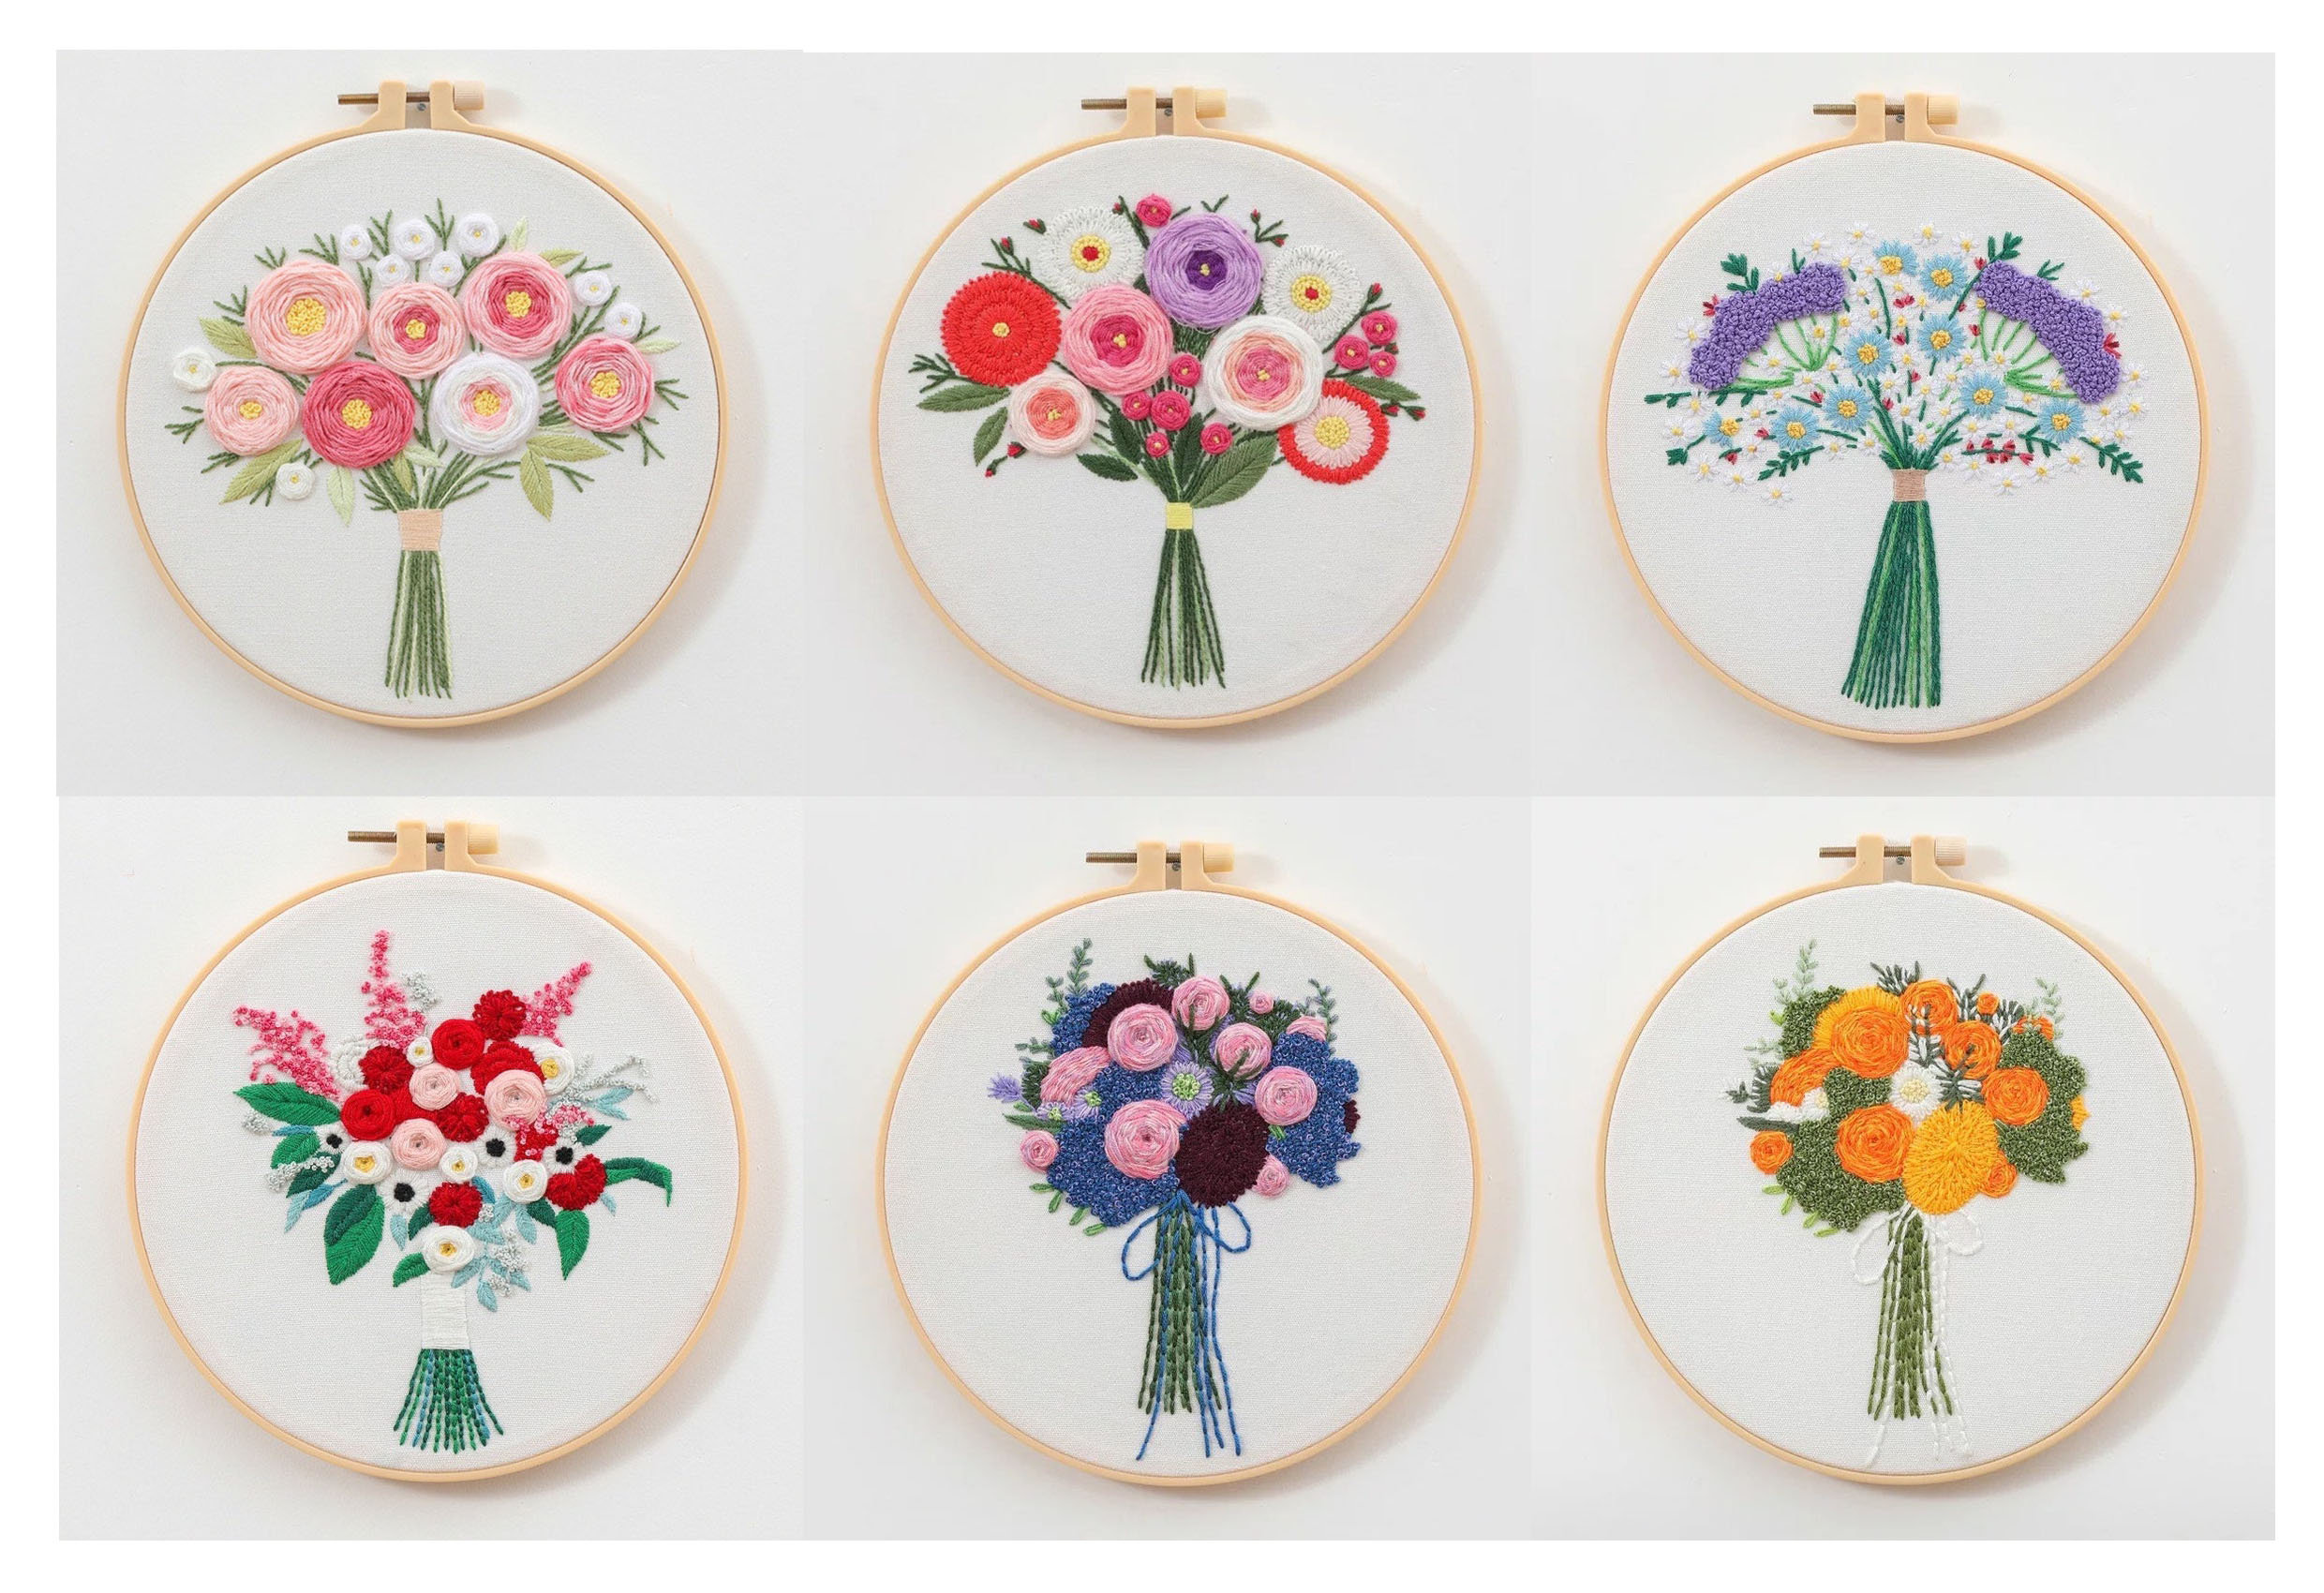  Full Range of Embroidery Starter Kit with Pattern DIY Beginner  Starter Stitch Kit Including Stamped Cloth with Pattern, Bamboo Embroidery  Hoop, Color Threads, Needles - Flowers White Orange